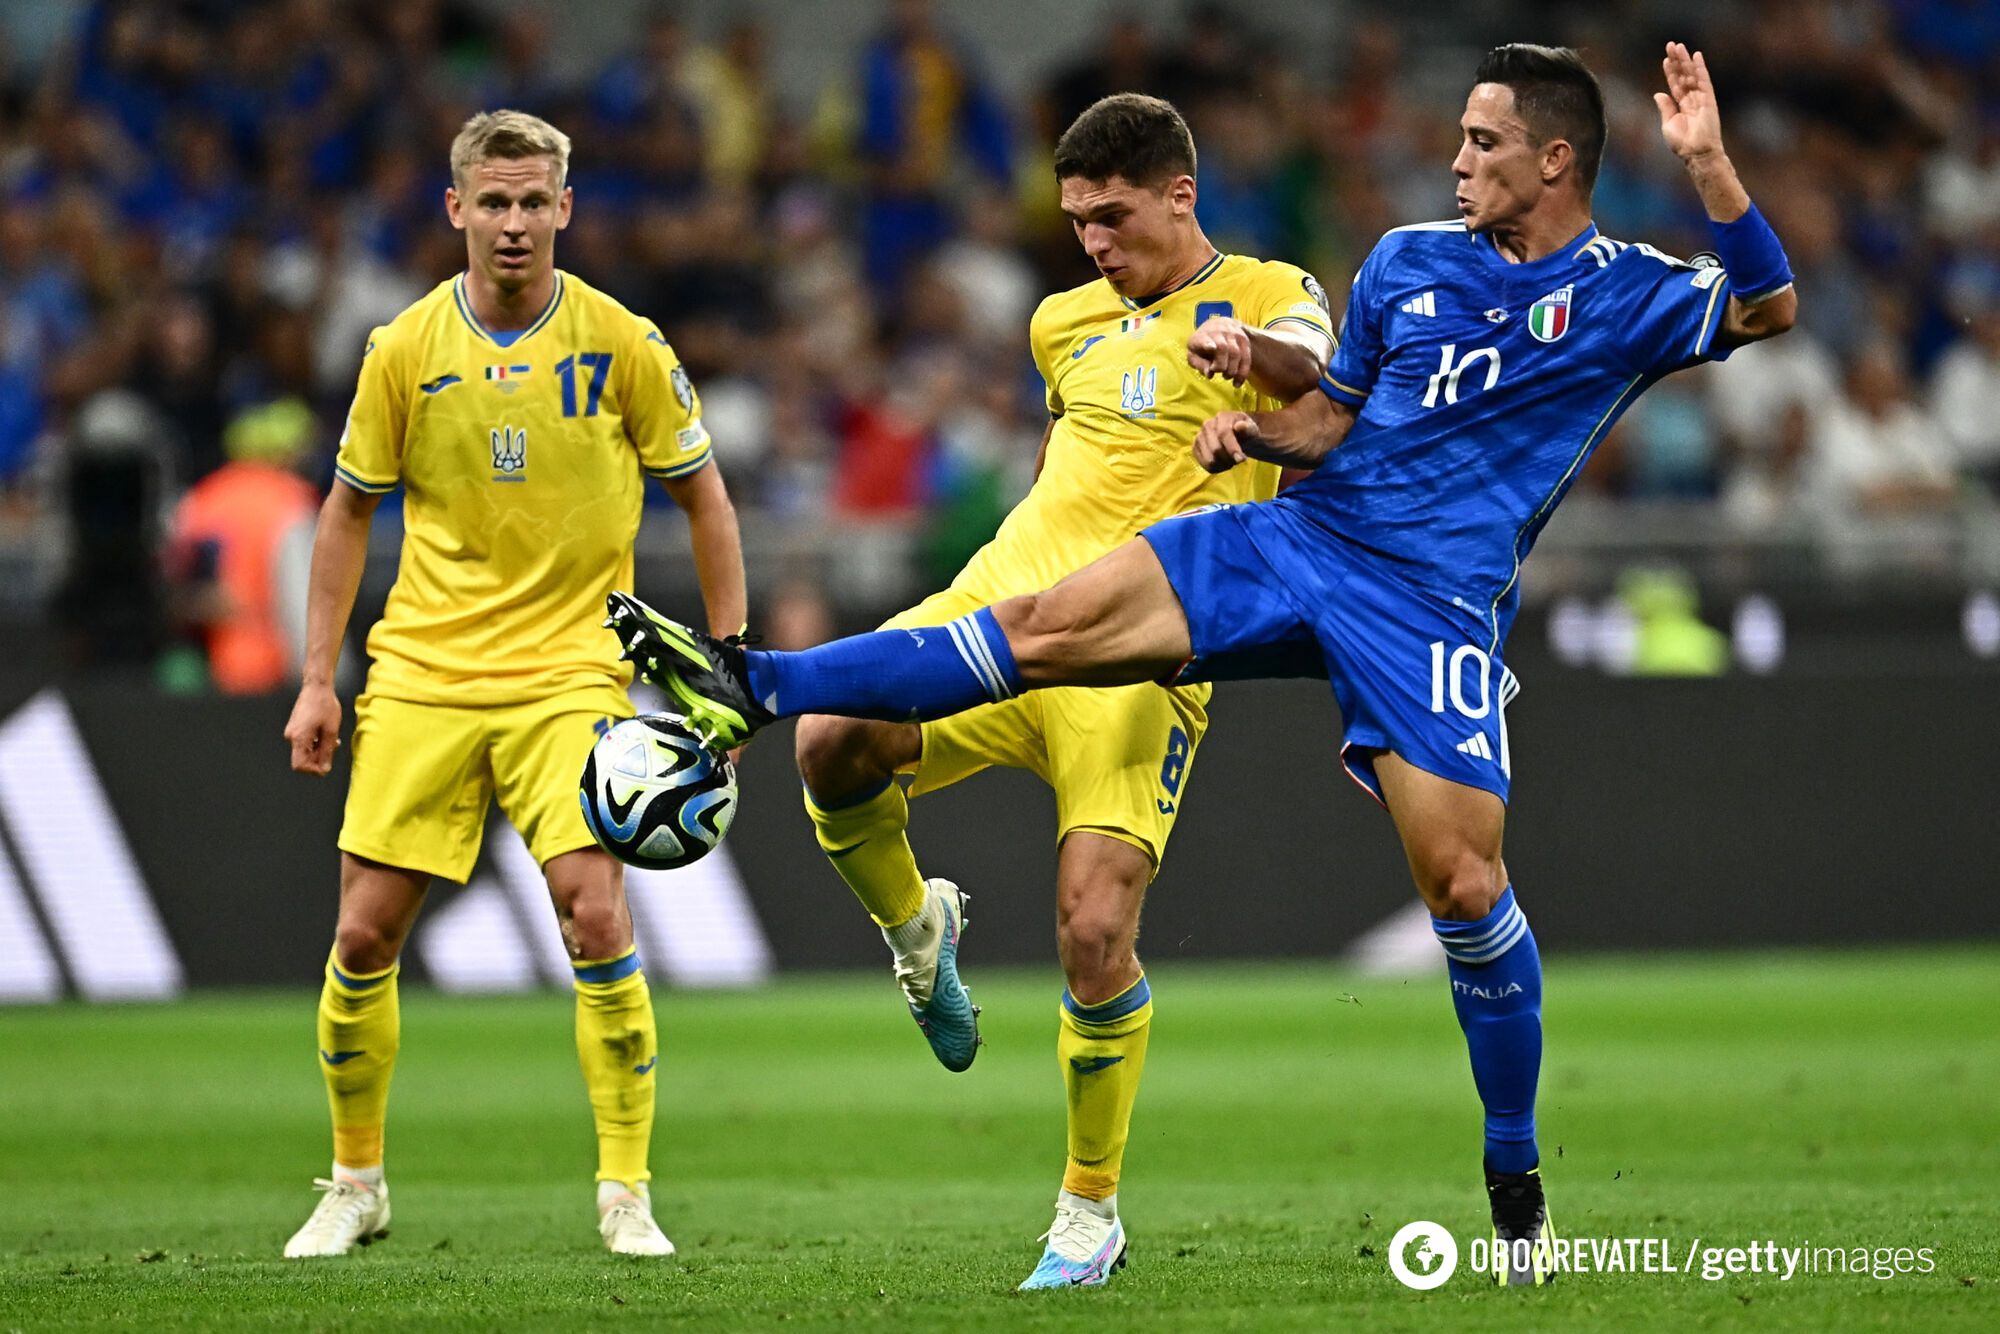 The match with Italy does not matter. Ukraine's national football team gets an extra chance to reach Euro 2024